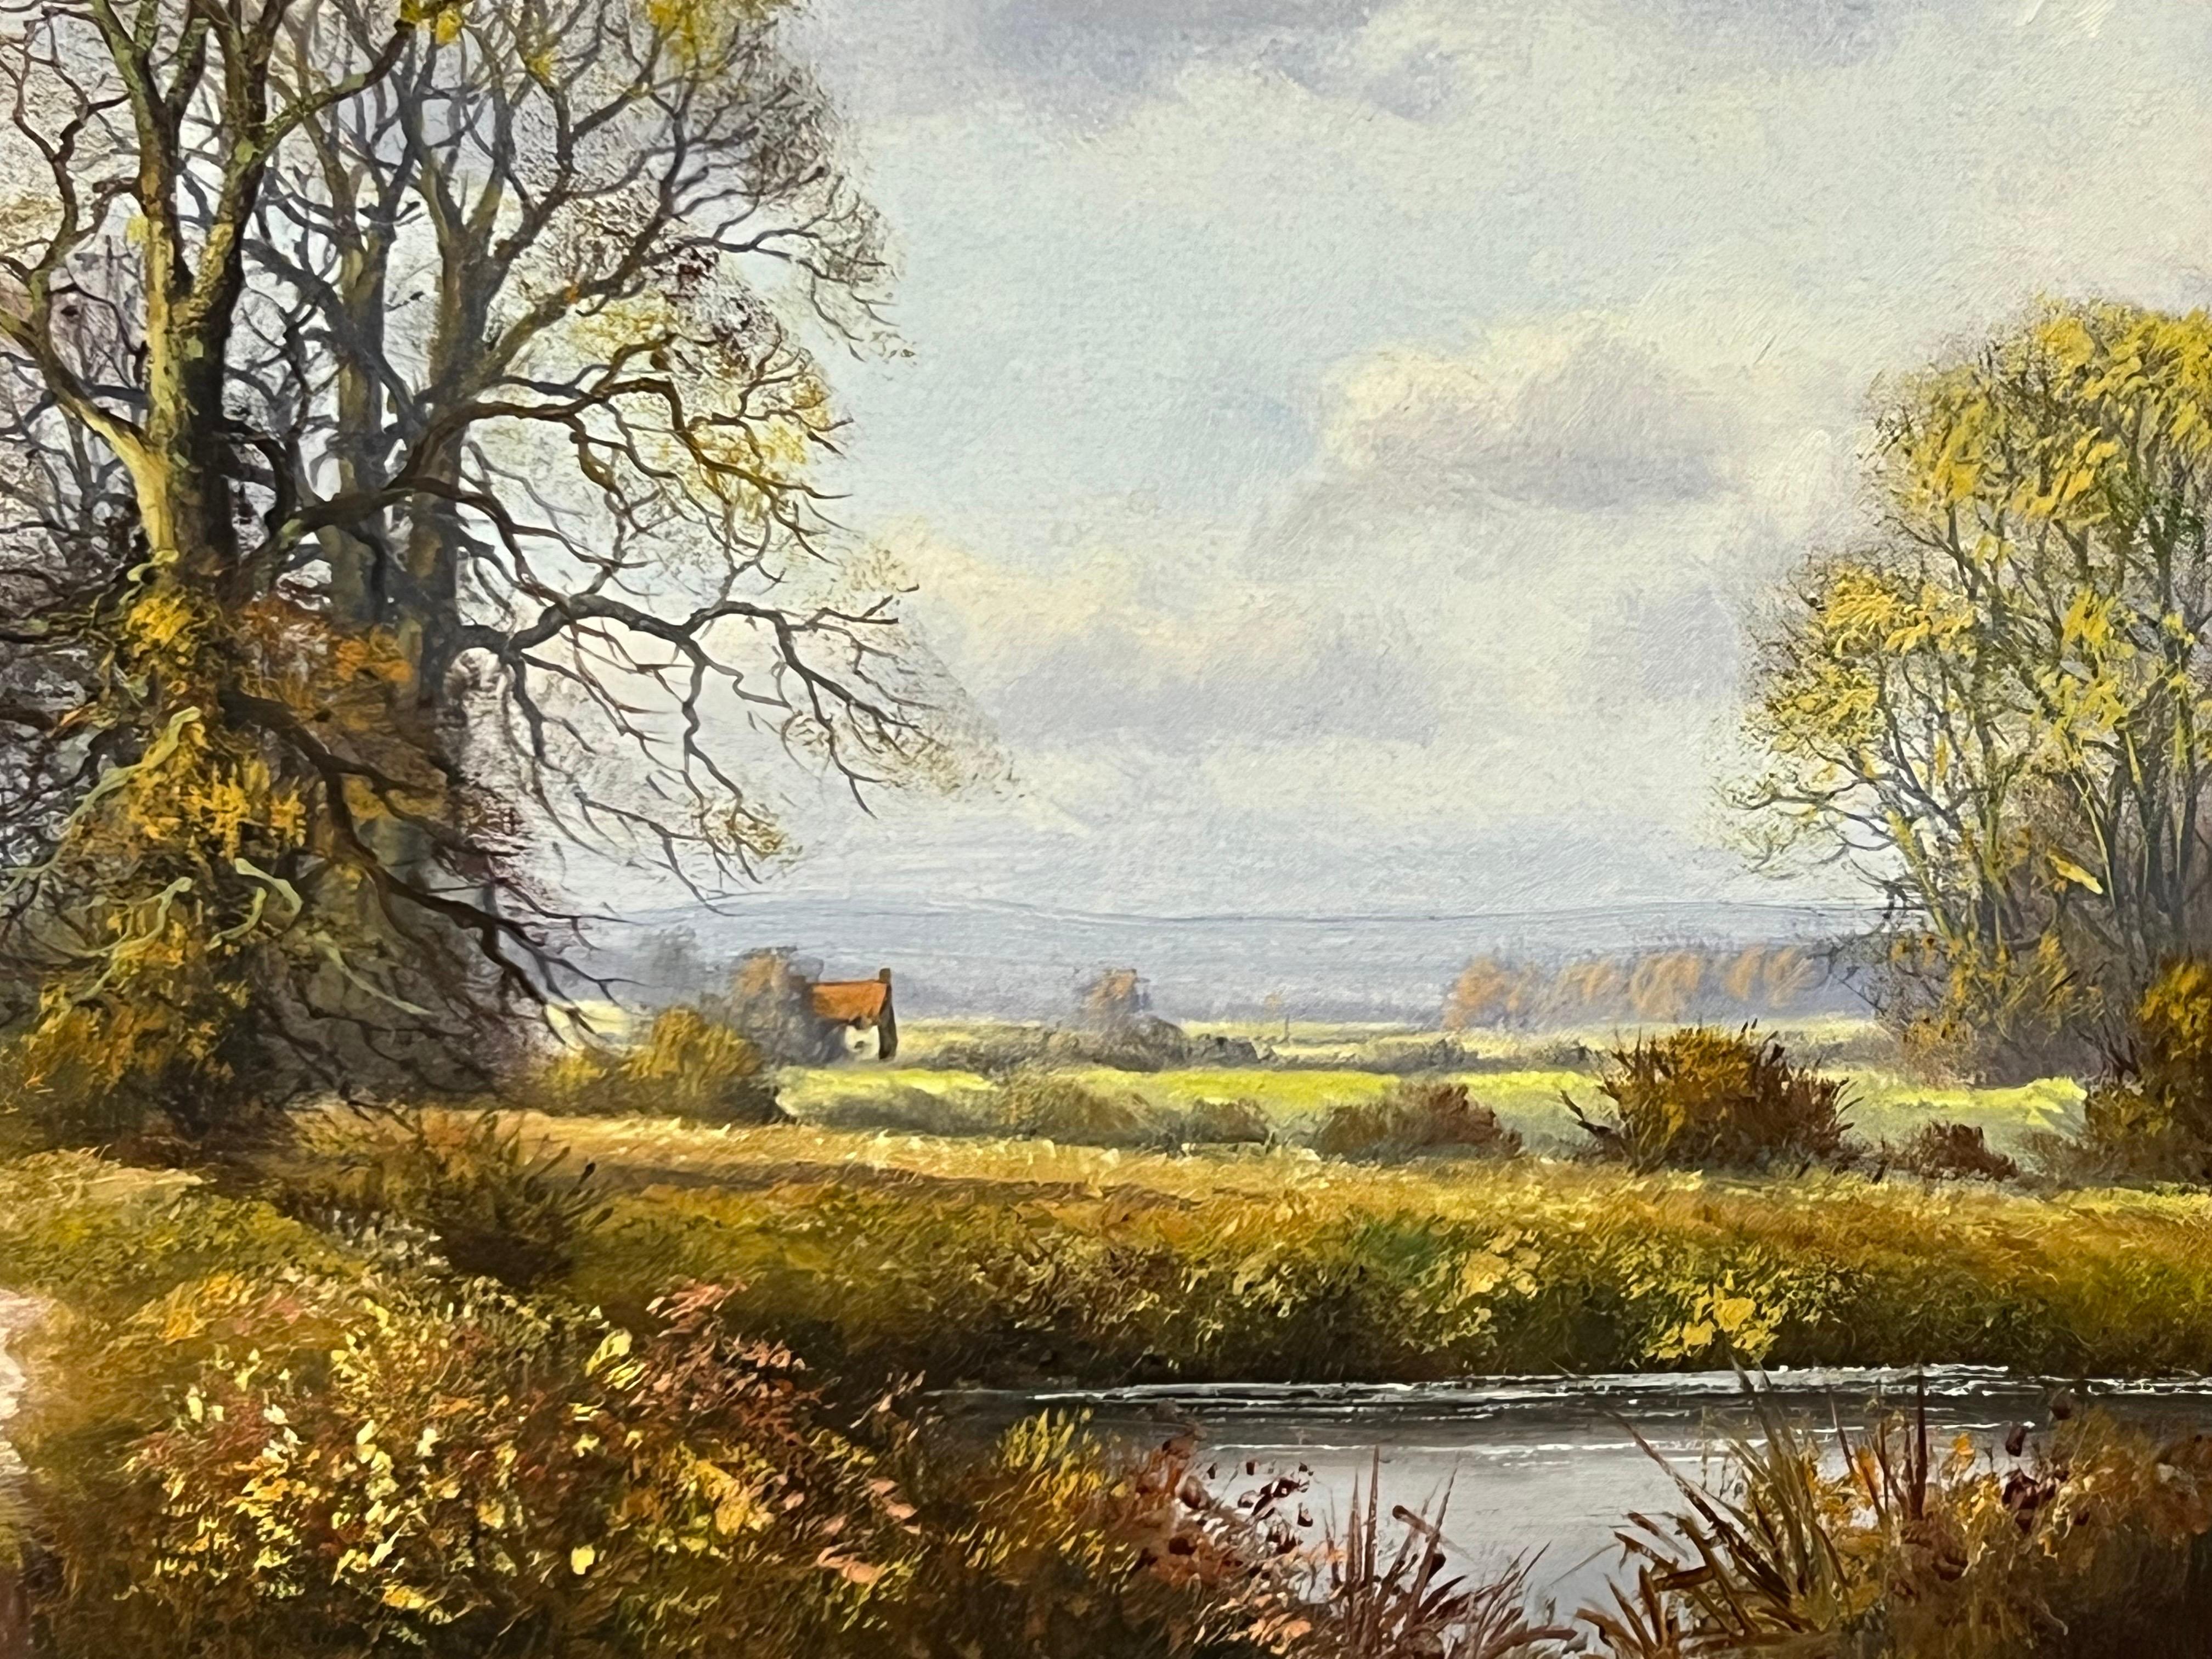 Farmhouse by a River in the English Countryside by 20th Century British Artist - Realist Painting by Peter J Greenhill